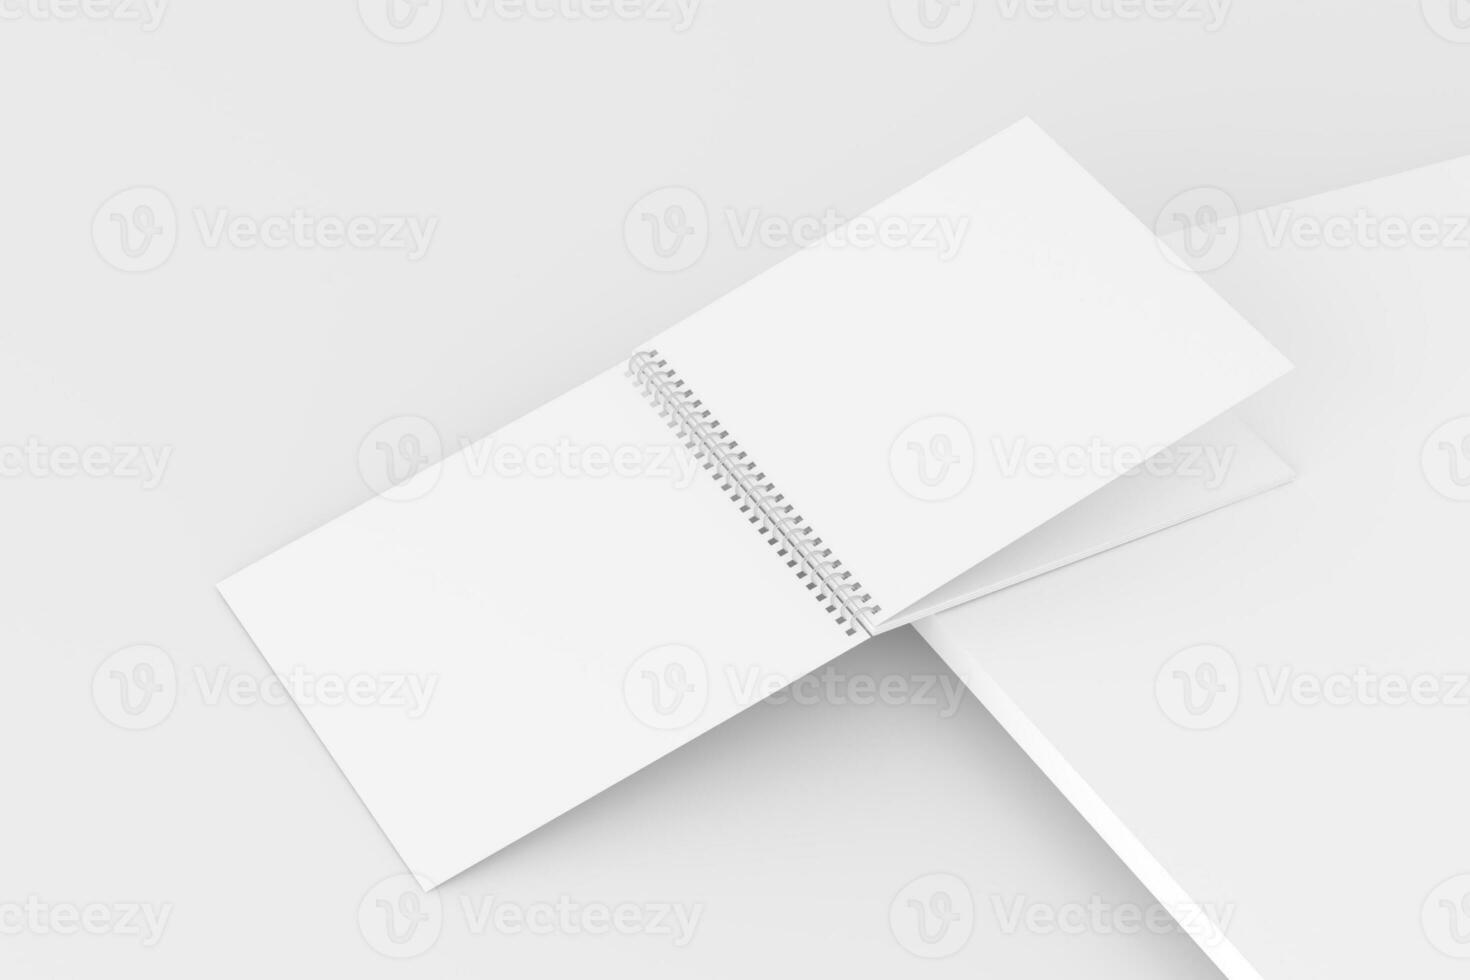 Square Spiral Notebook 3D Rendering White Blank Mockup photo